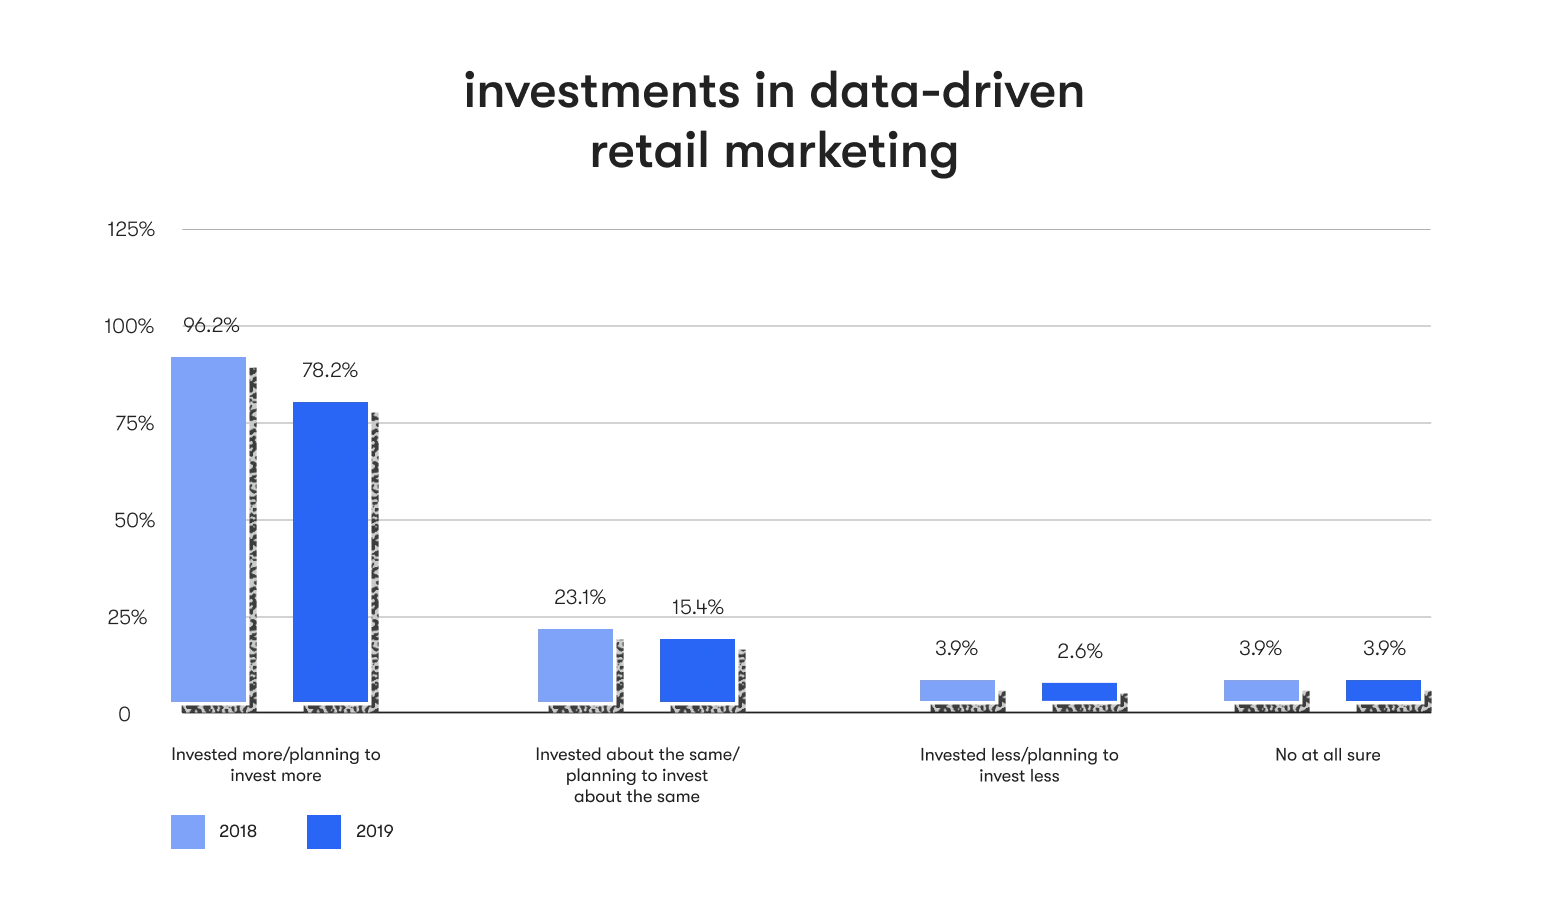 Change in data driven marketing spending in the United States in 2018 and 2019 illustration